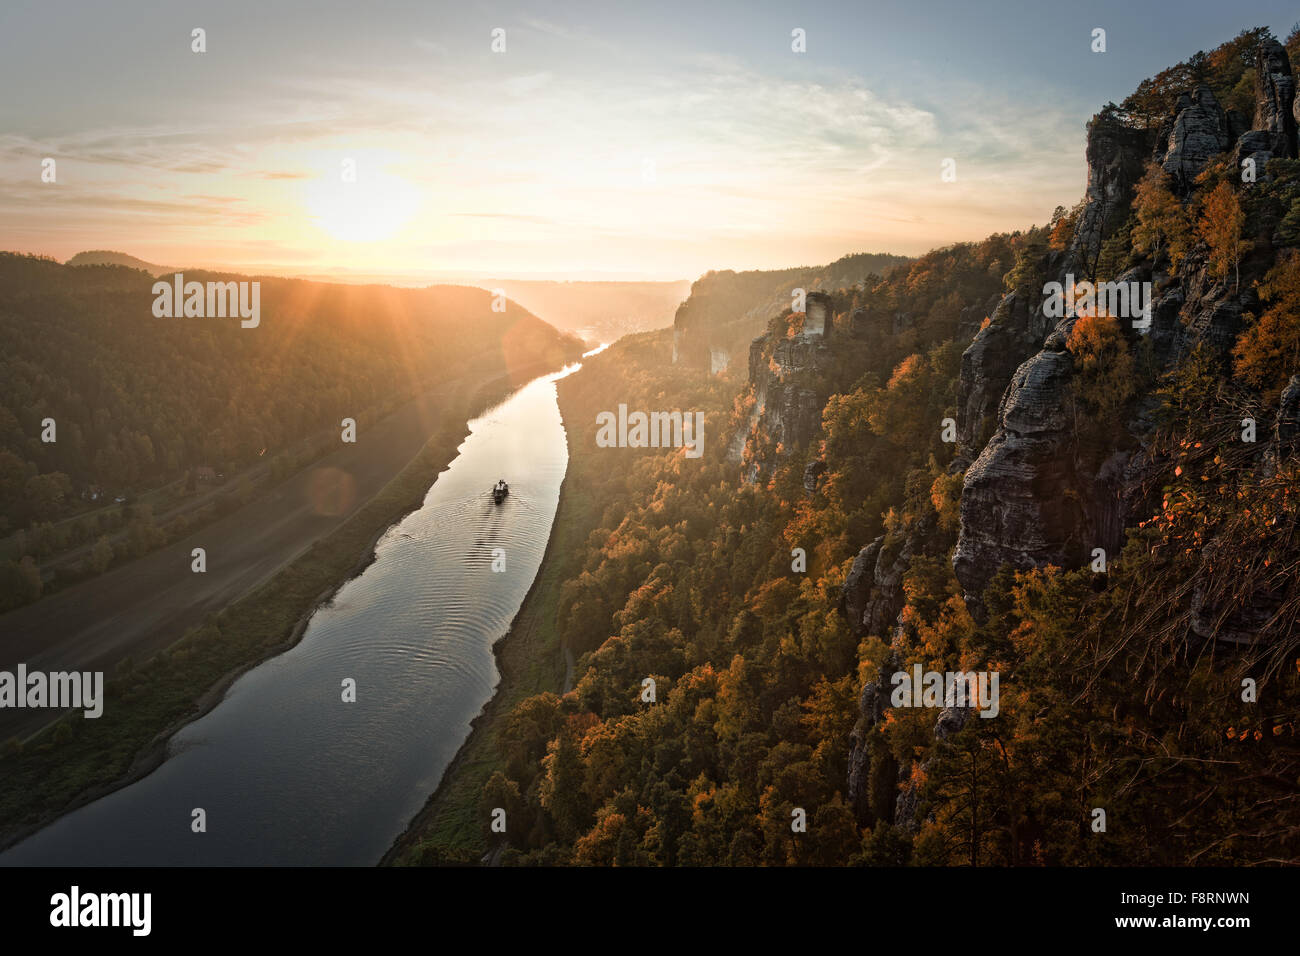 View of Elbe from bastion, sunset, Elbe Sandstone Mountains, Saxon Switzerland National Park, Saxony, Germany Stock Photo